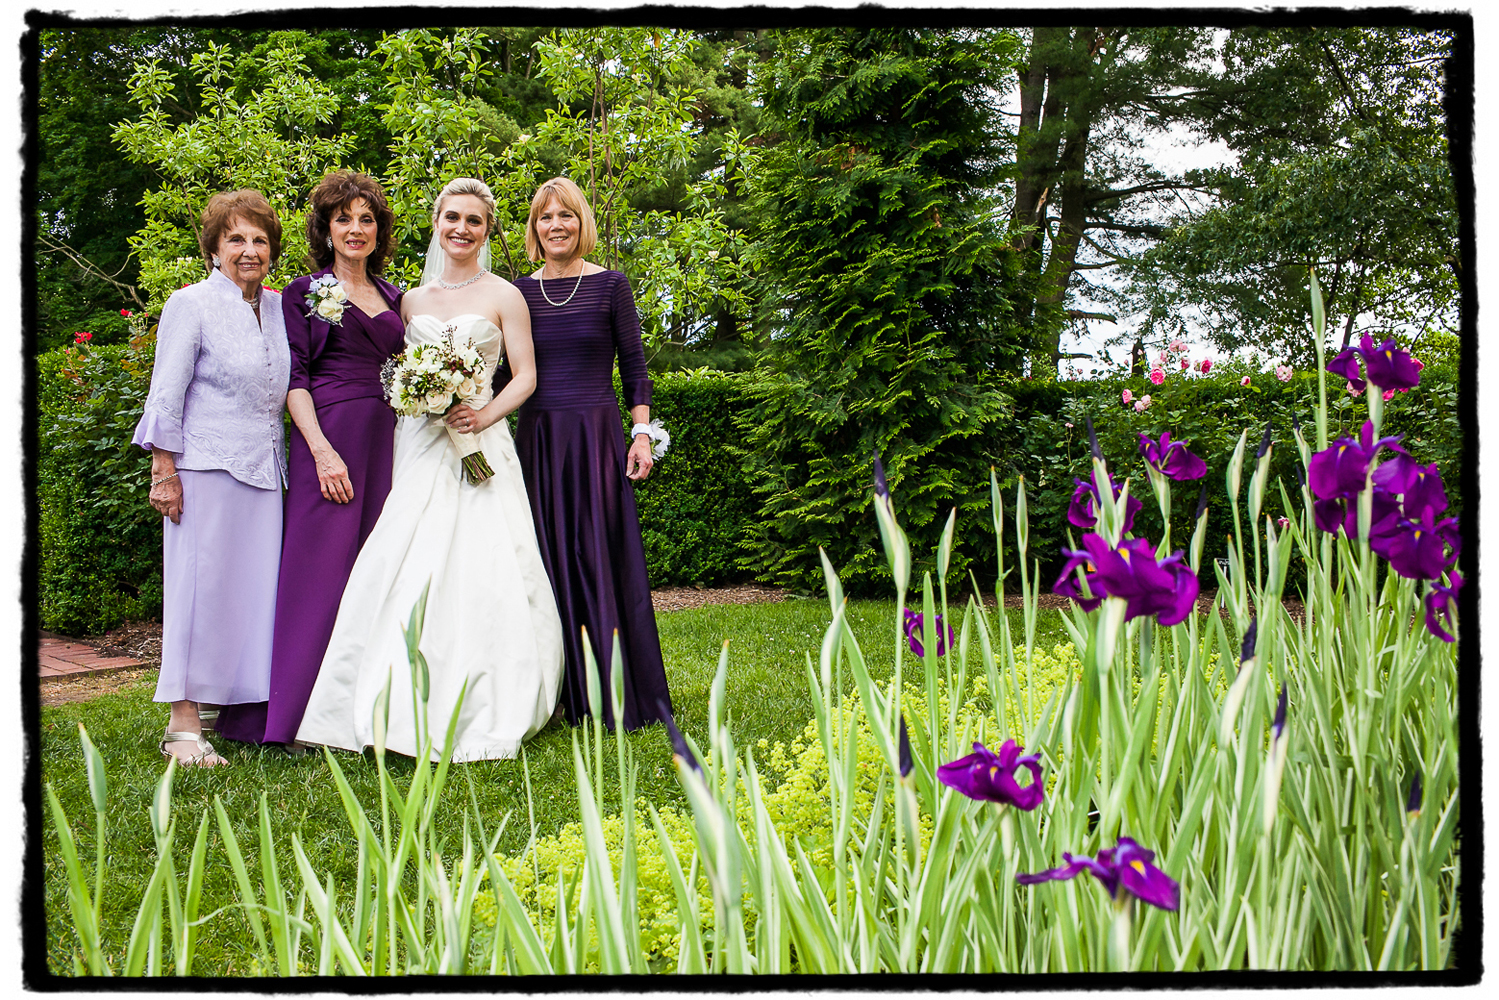 The irises at Frelinghuysen Arboretum were a perfect complement to the dresses worn by this bride's mother, aunt, and grandmother.